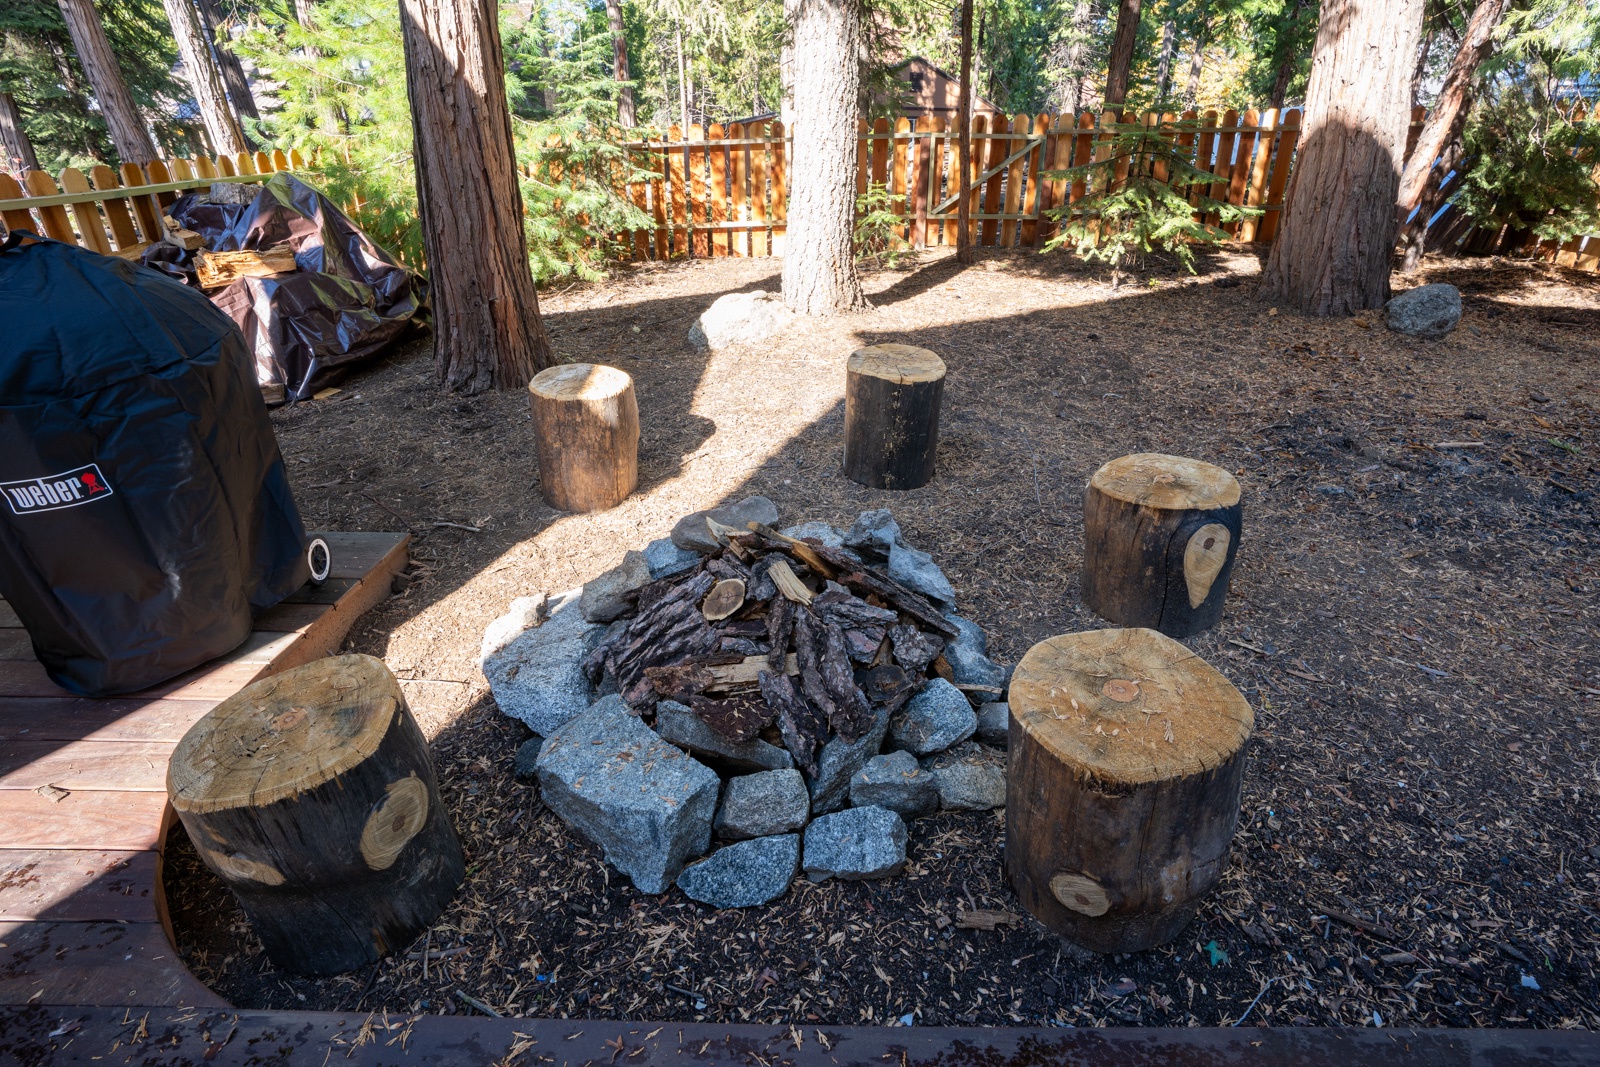 Gather around the firepit & swap stories during your stay